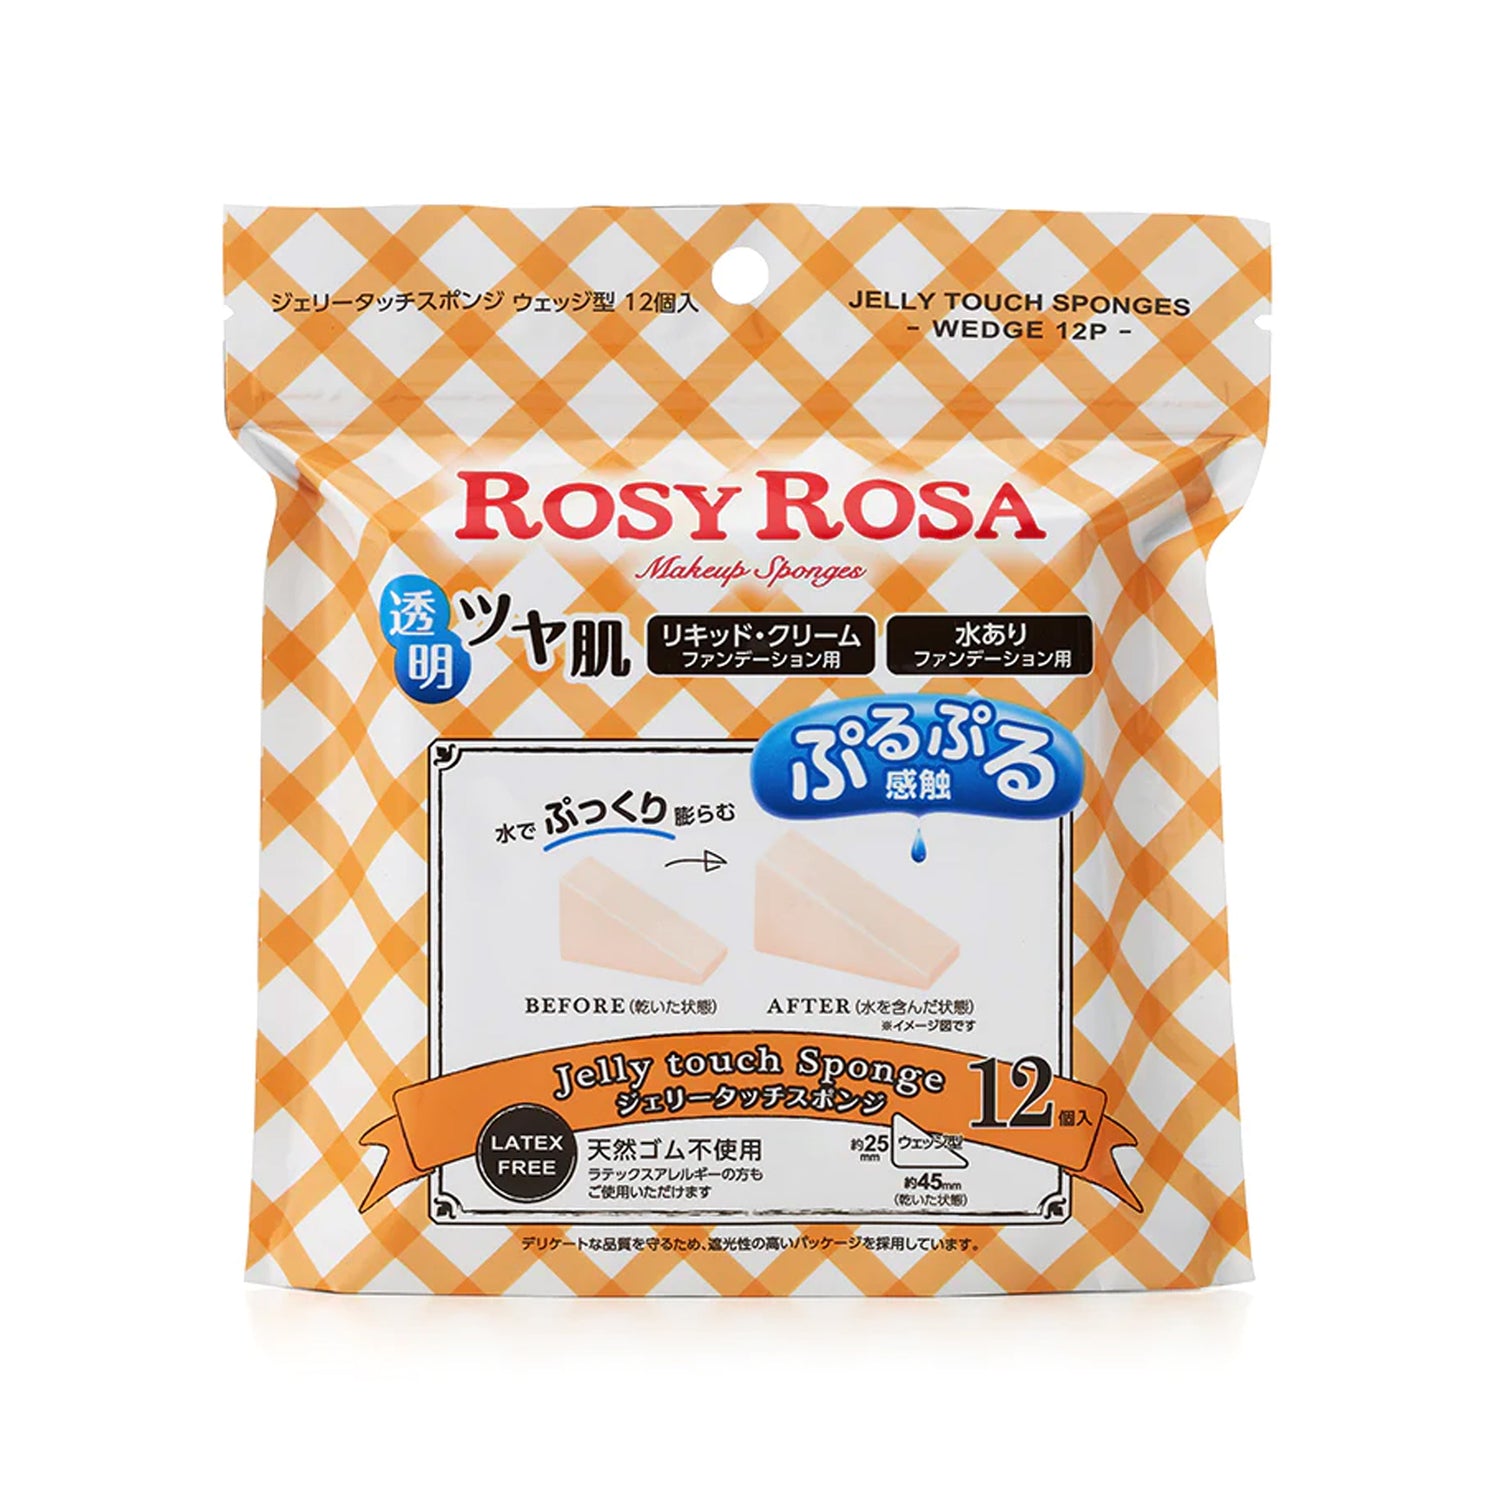 ROSY ROSA Jelly Touch Sponge Wedge Type